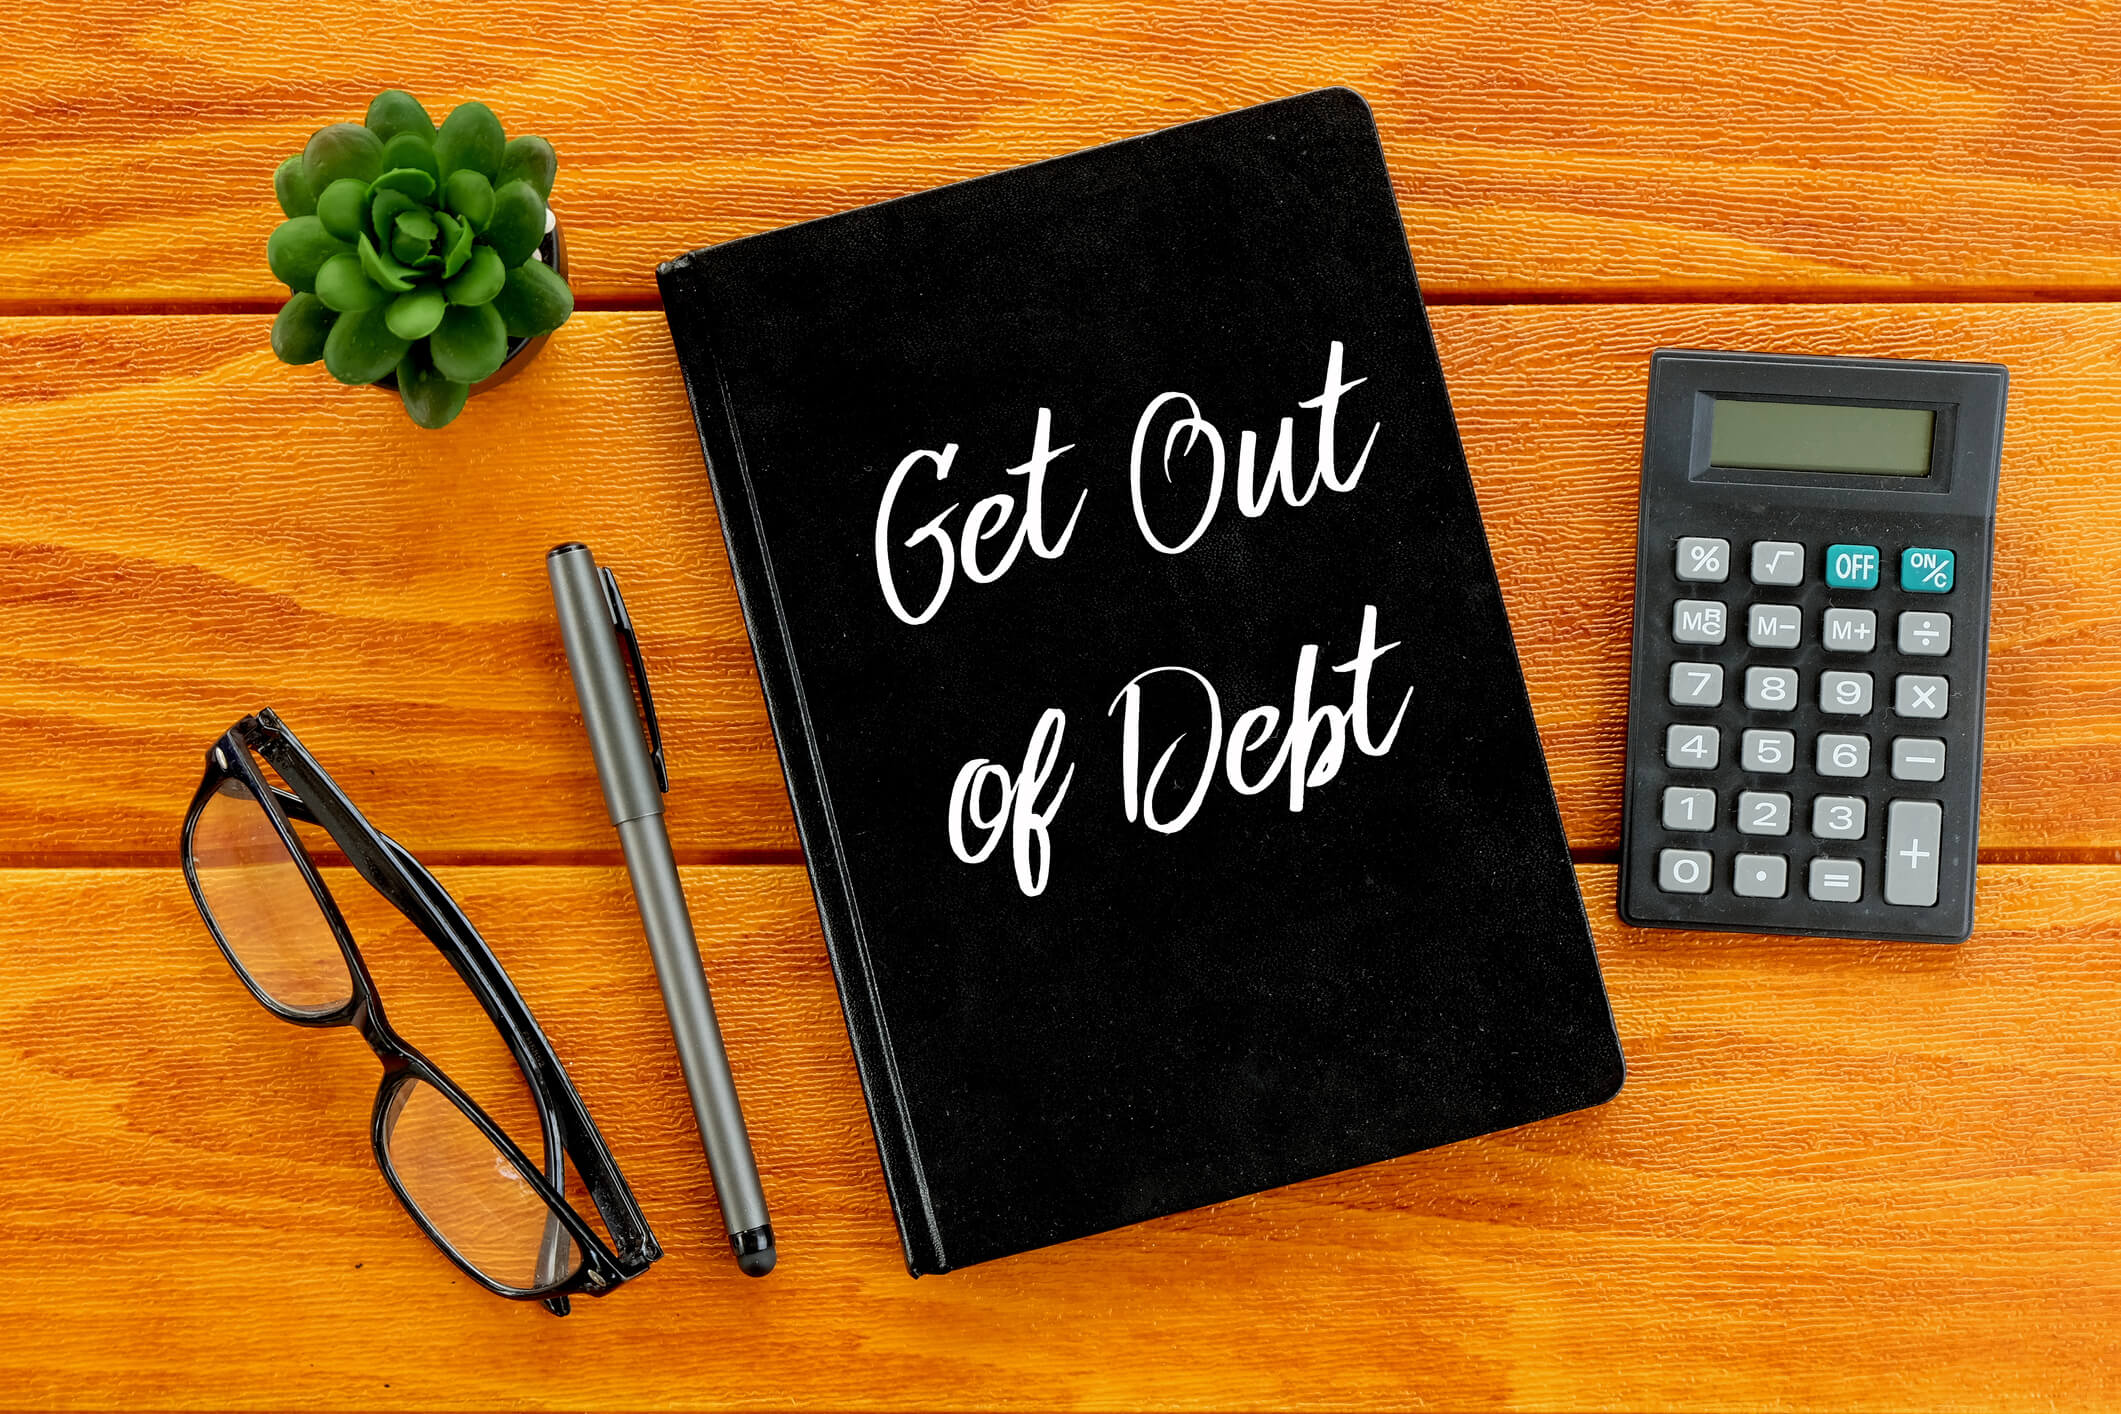 Get Out of Debt Apps - Complete Controller